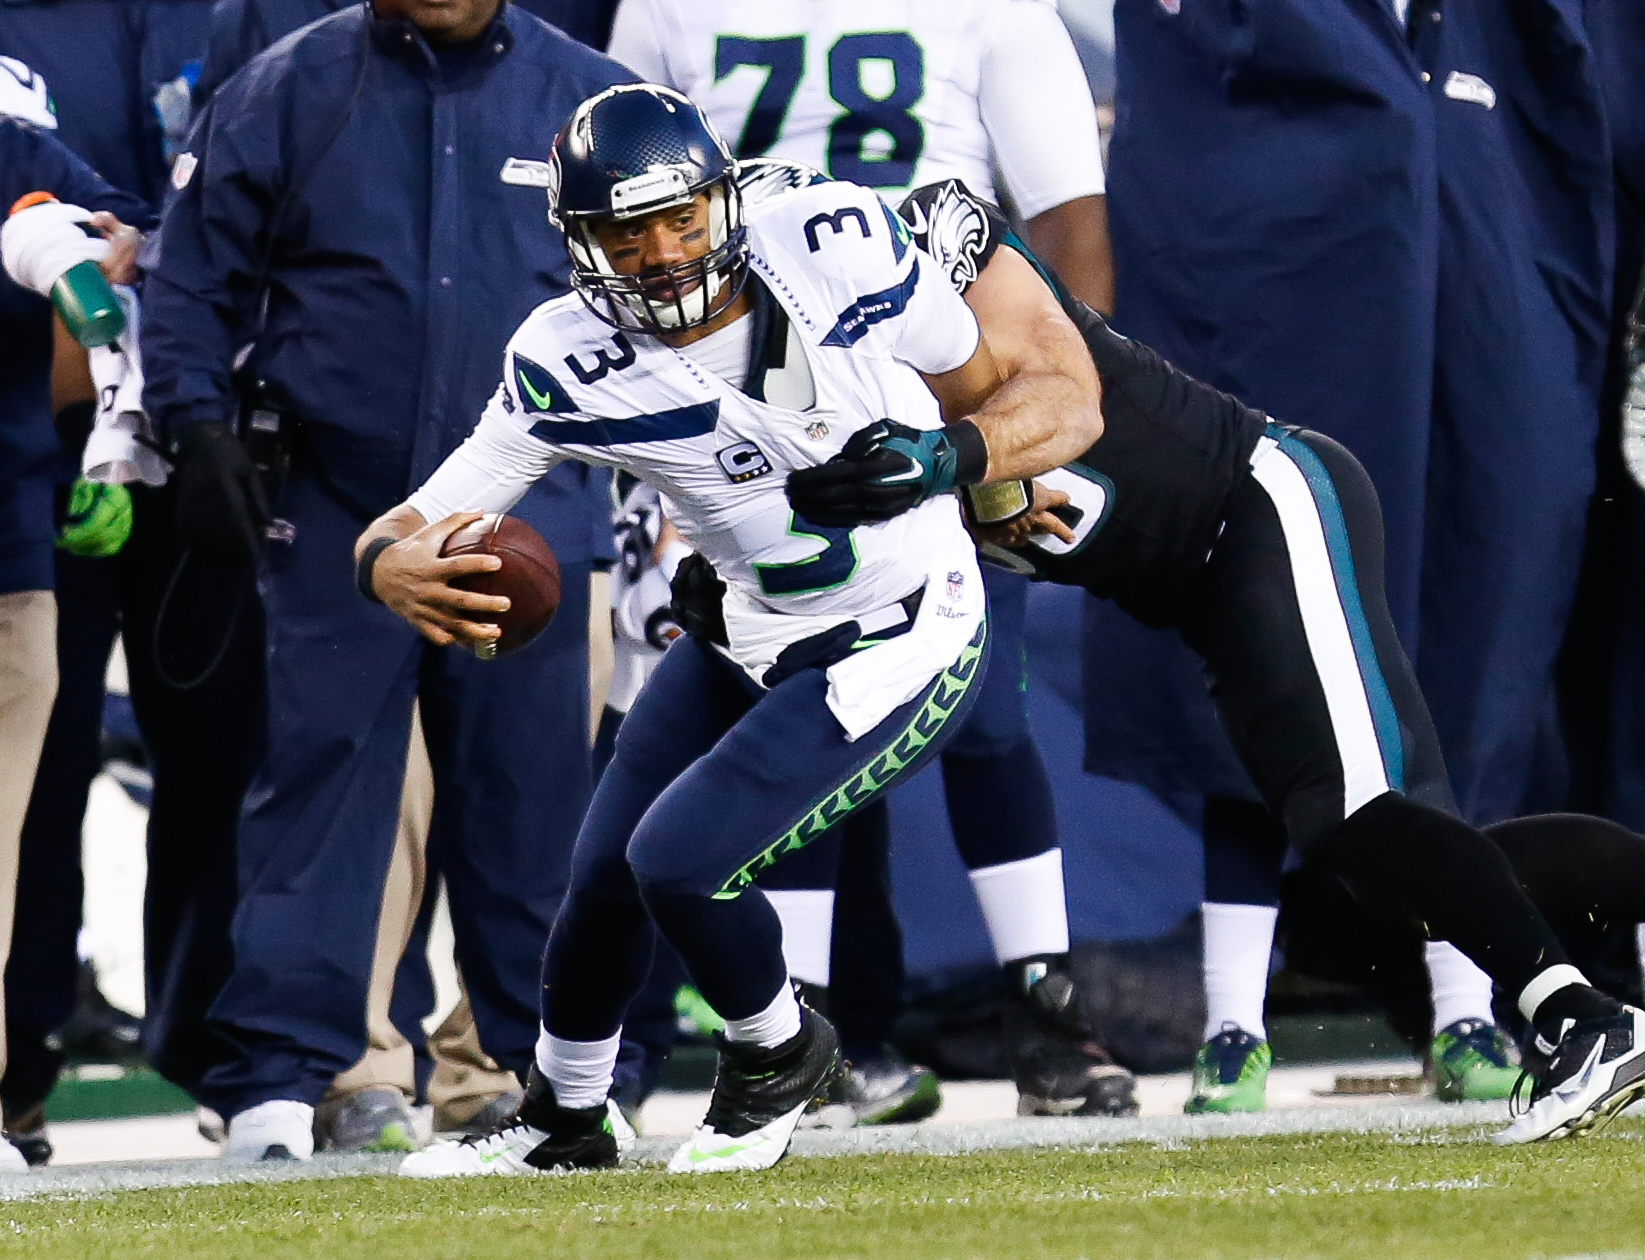 Russell Wilson threw for two touchdowns and ran for another. (Bill Streicher, USA TODAY Sports)